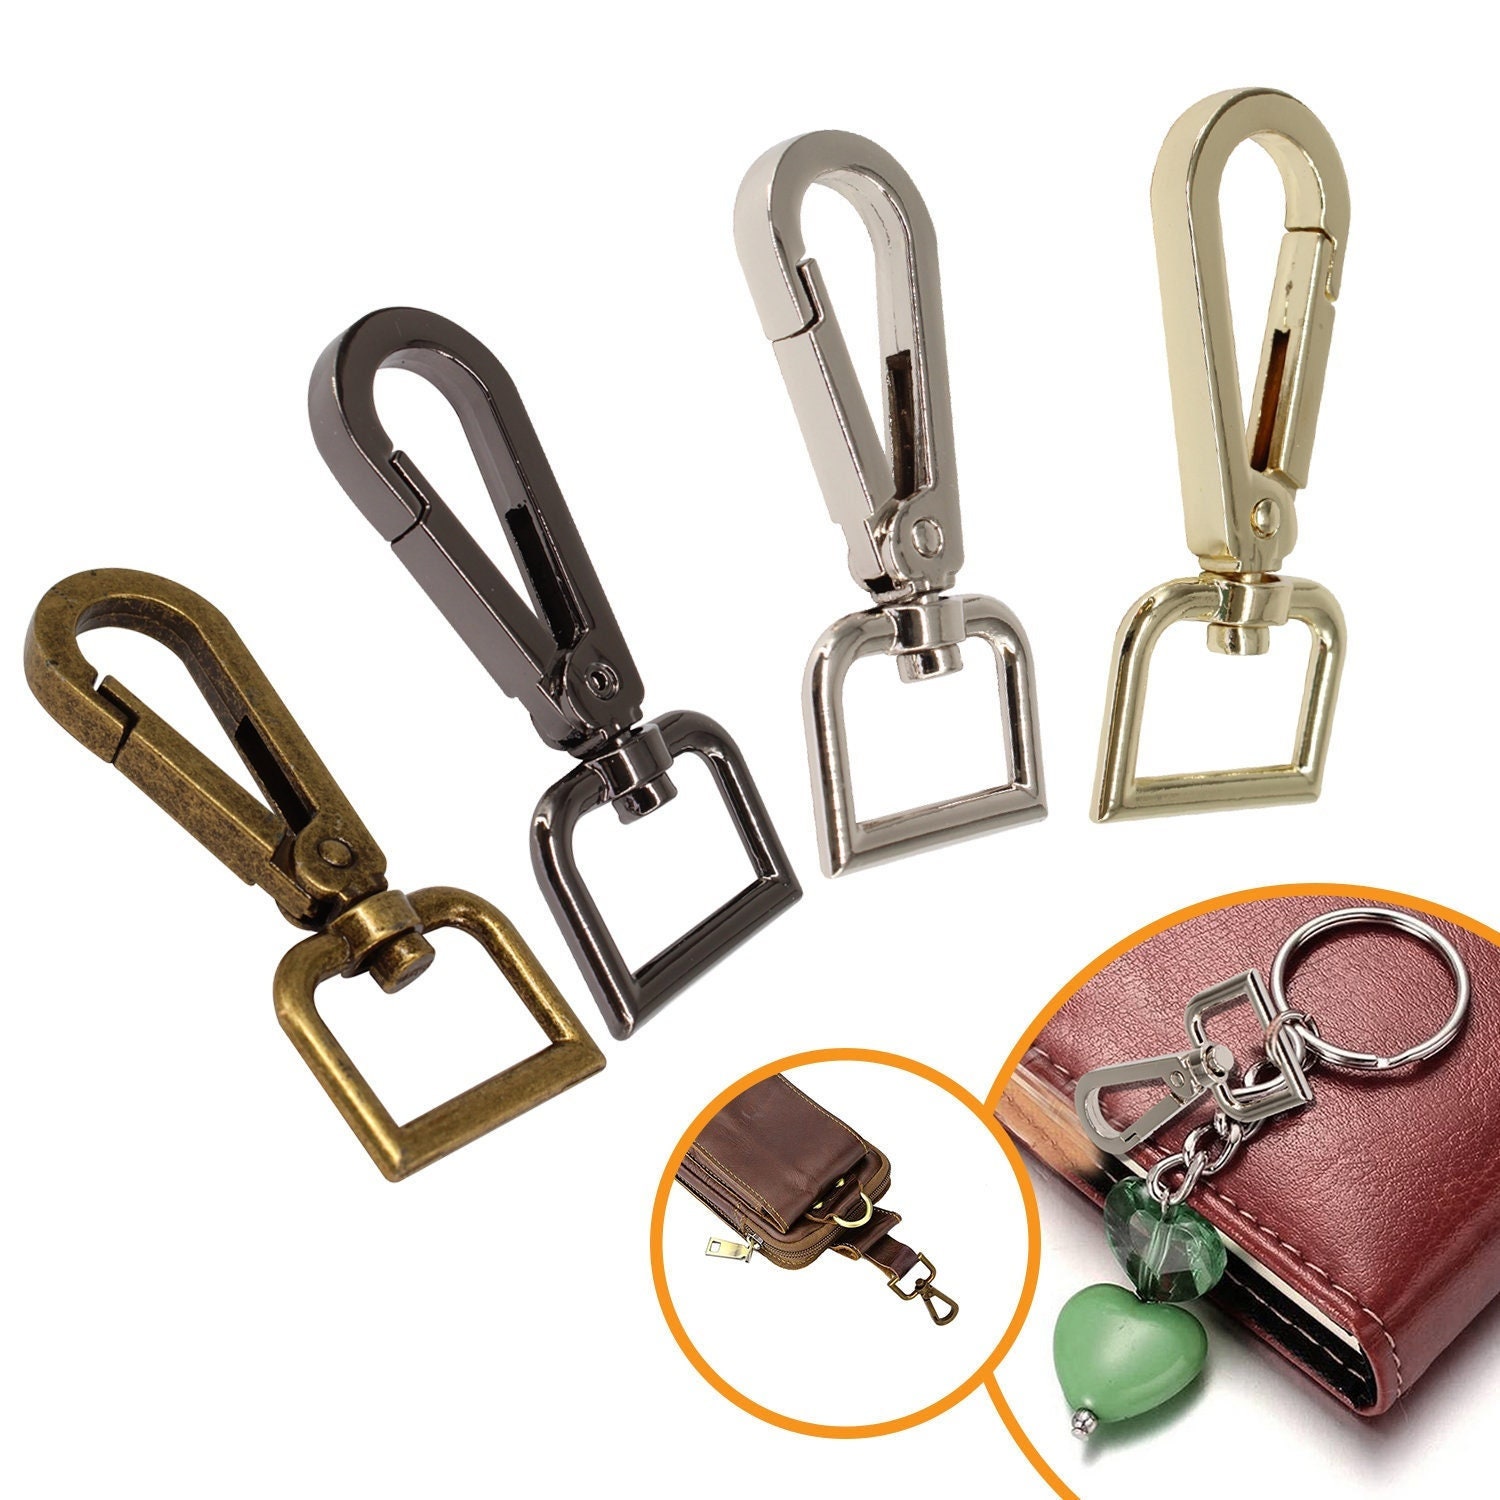 Specialist ID Premium Metal Lobster Claw Clasps with Wide inch D Ring and 360 Swivel Snap Clasp Trigger ID / Key Clip (6920-2360)